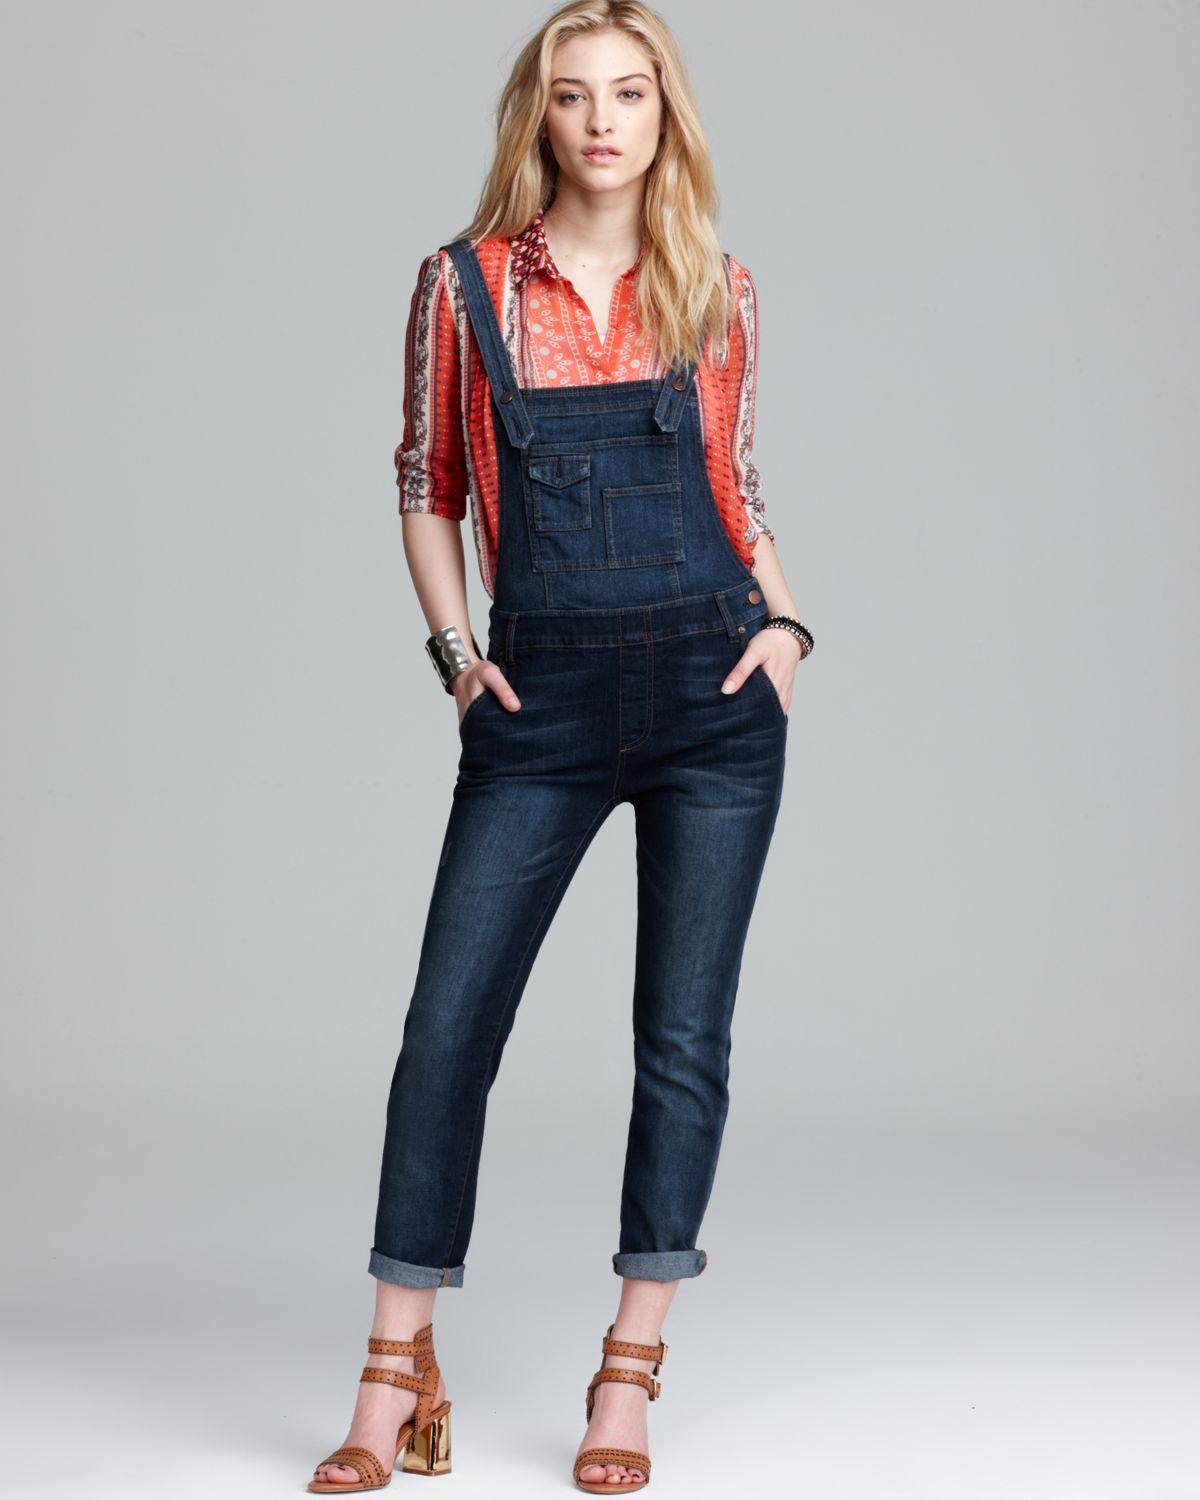 Lyst - Free People Overalls Washed Cord Denim in Blue